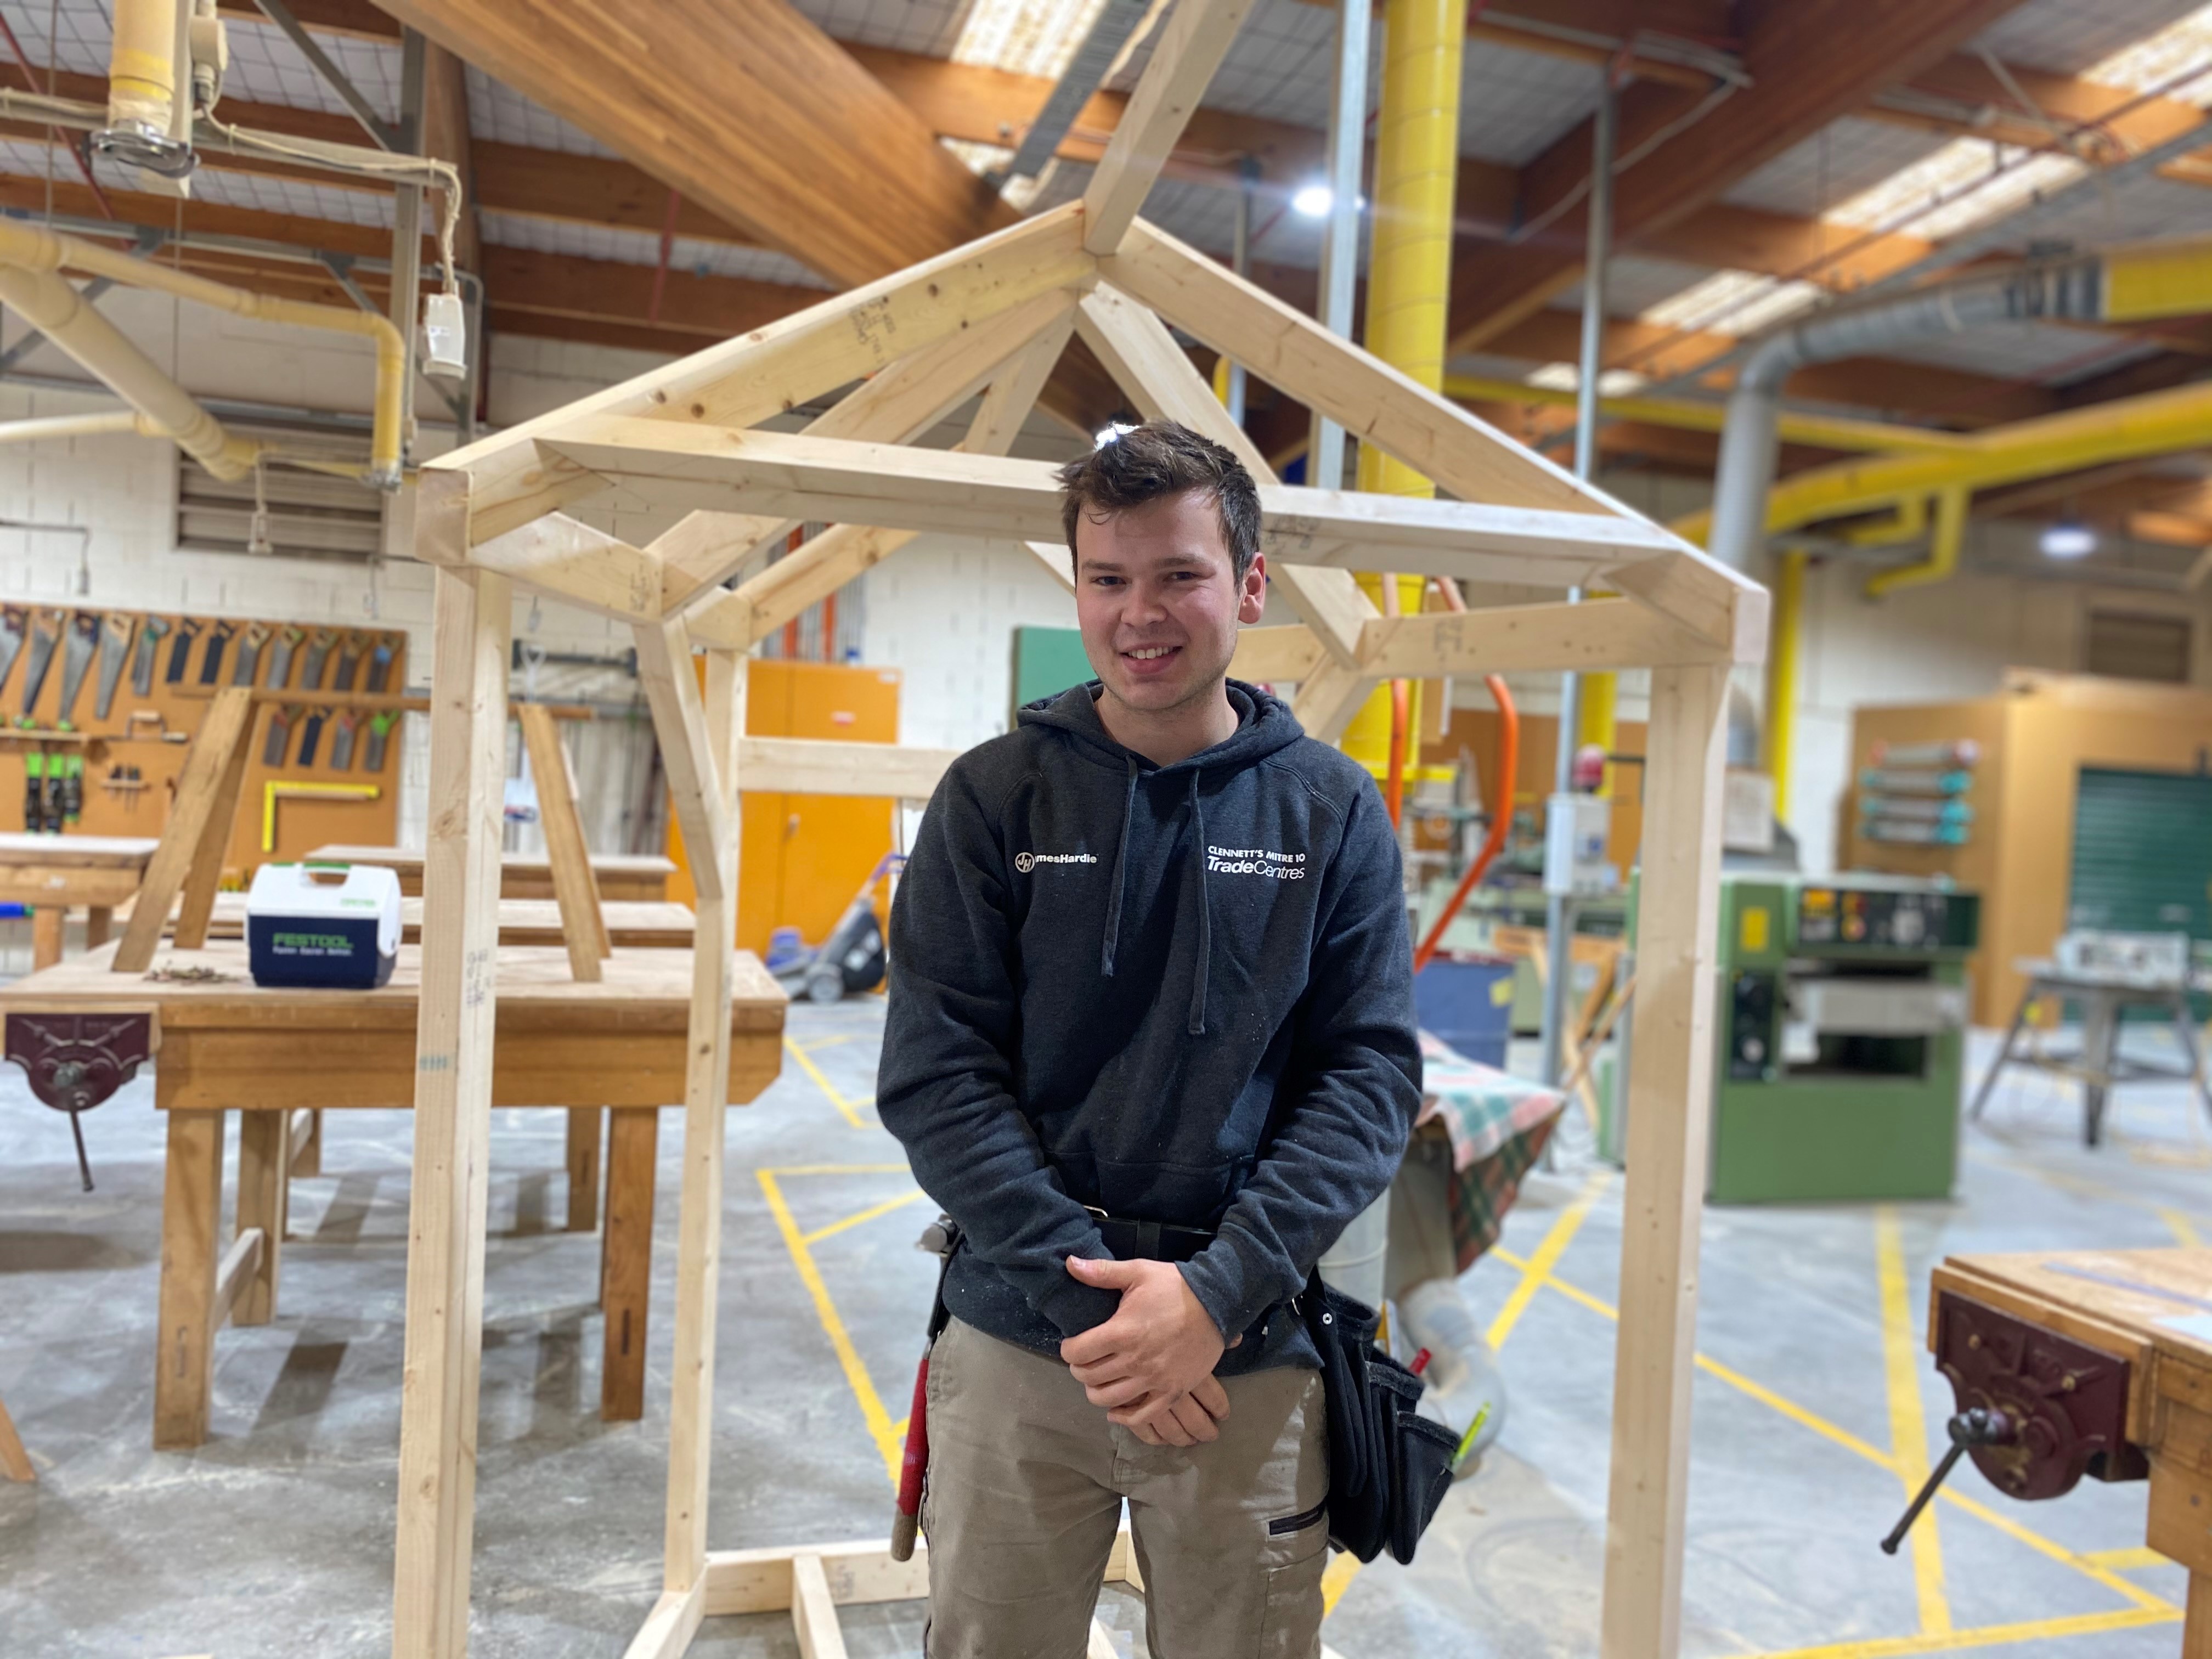 Carpentry student poses for a photo in the workshop